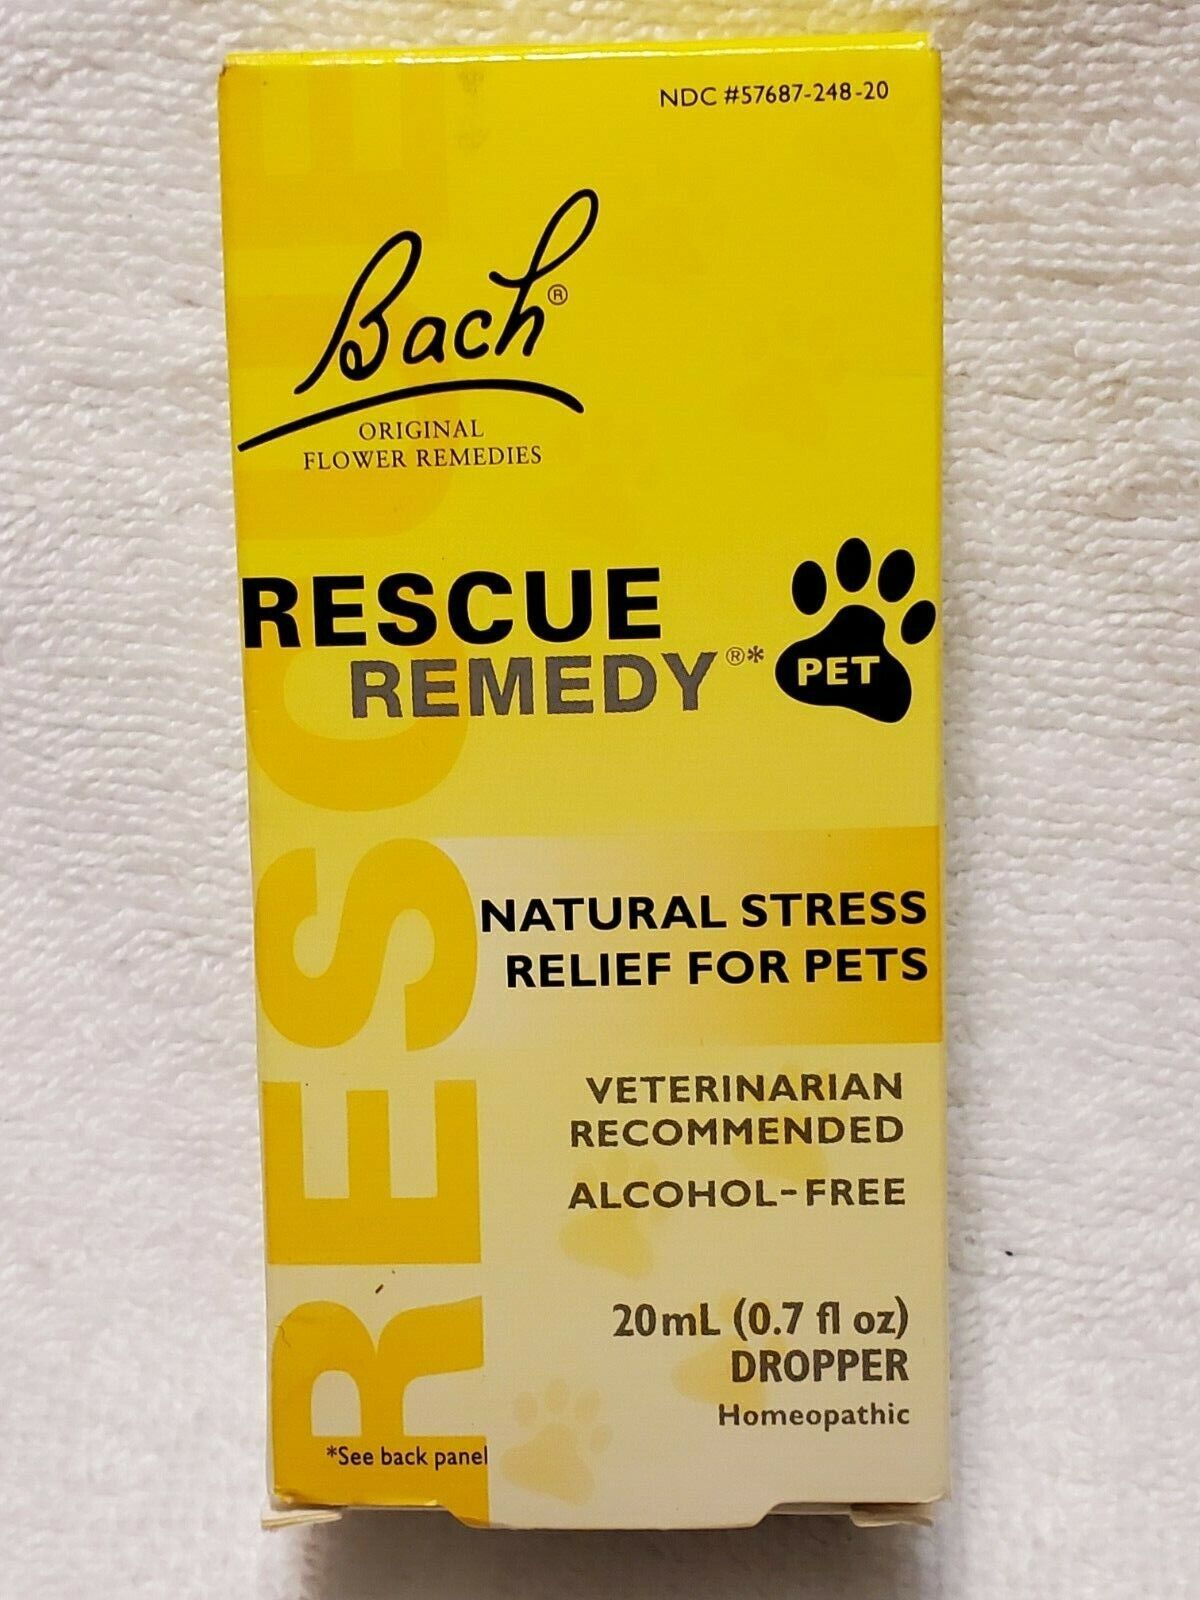 Bach Original Flower Remedies Rescue Natural Stress Relief for Pets 20 ml 